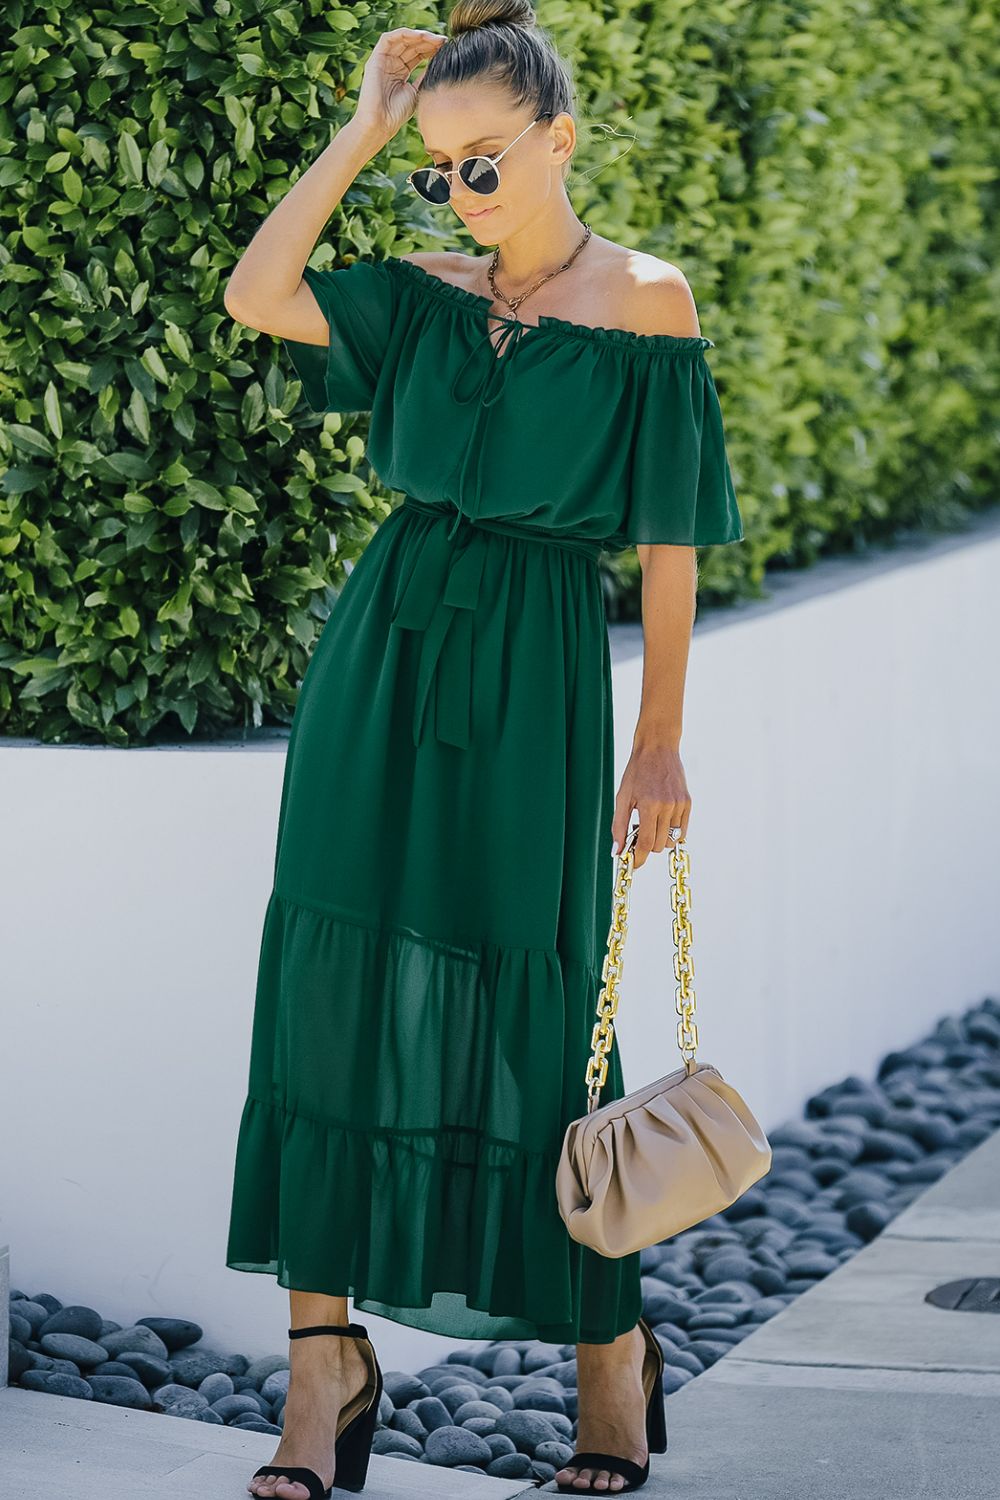 Tie Front Off-Shoulder Belted Tiered Maxi Dress - Classy Fashion Chic